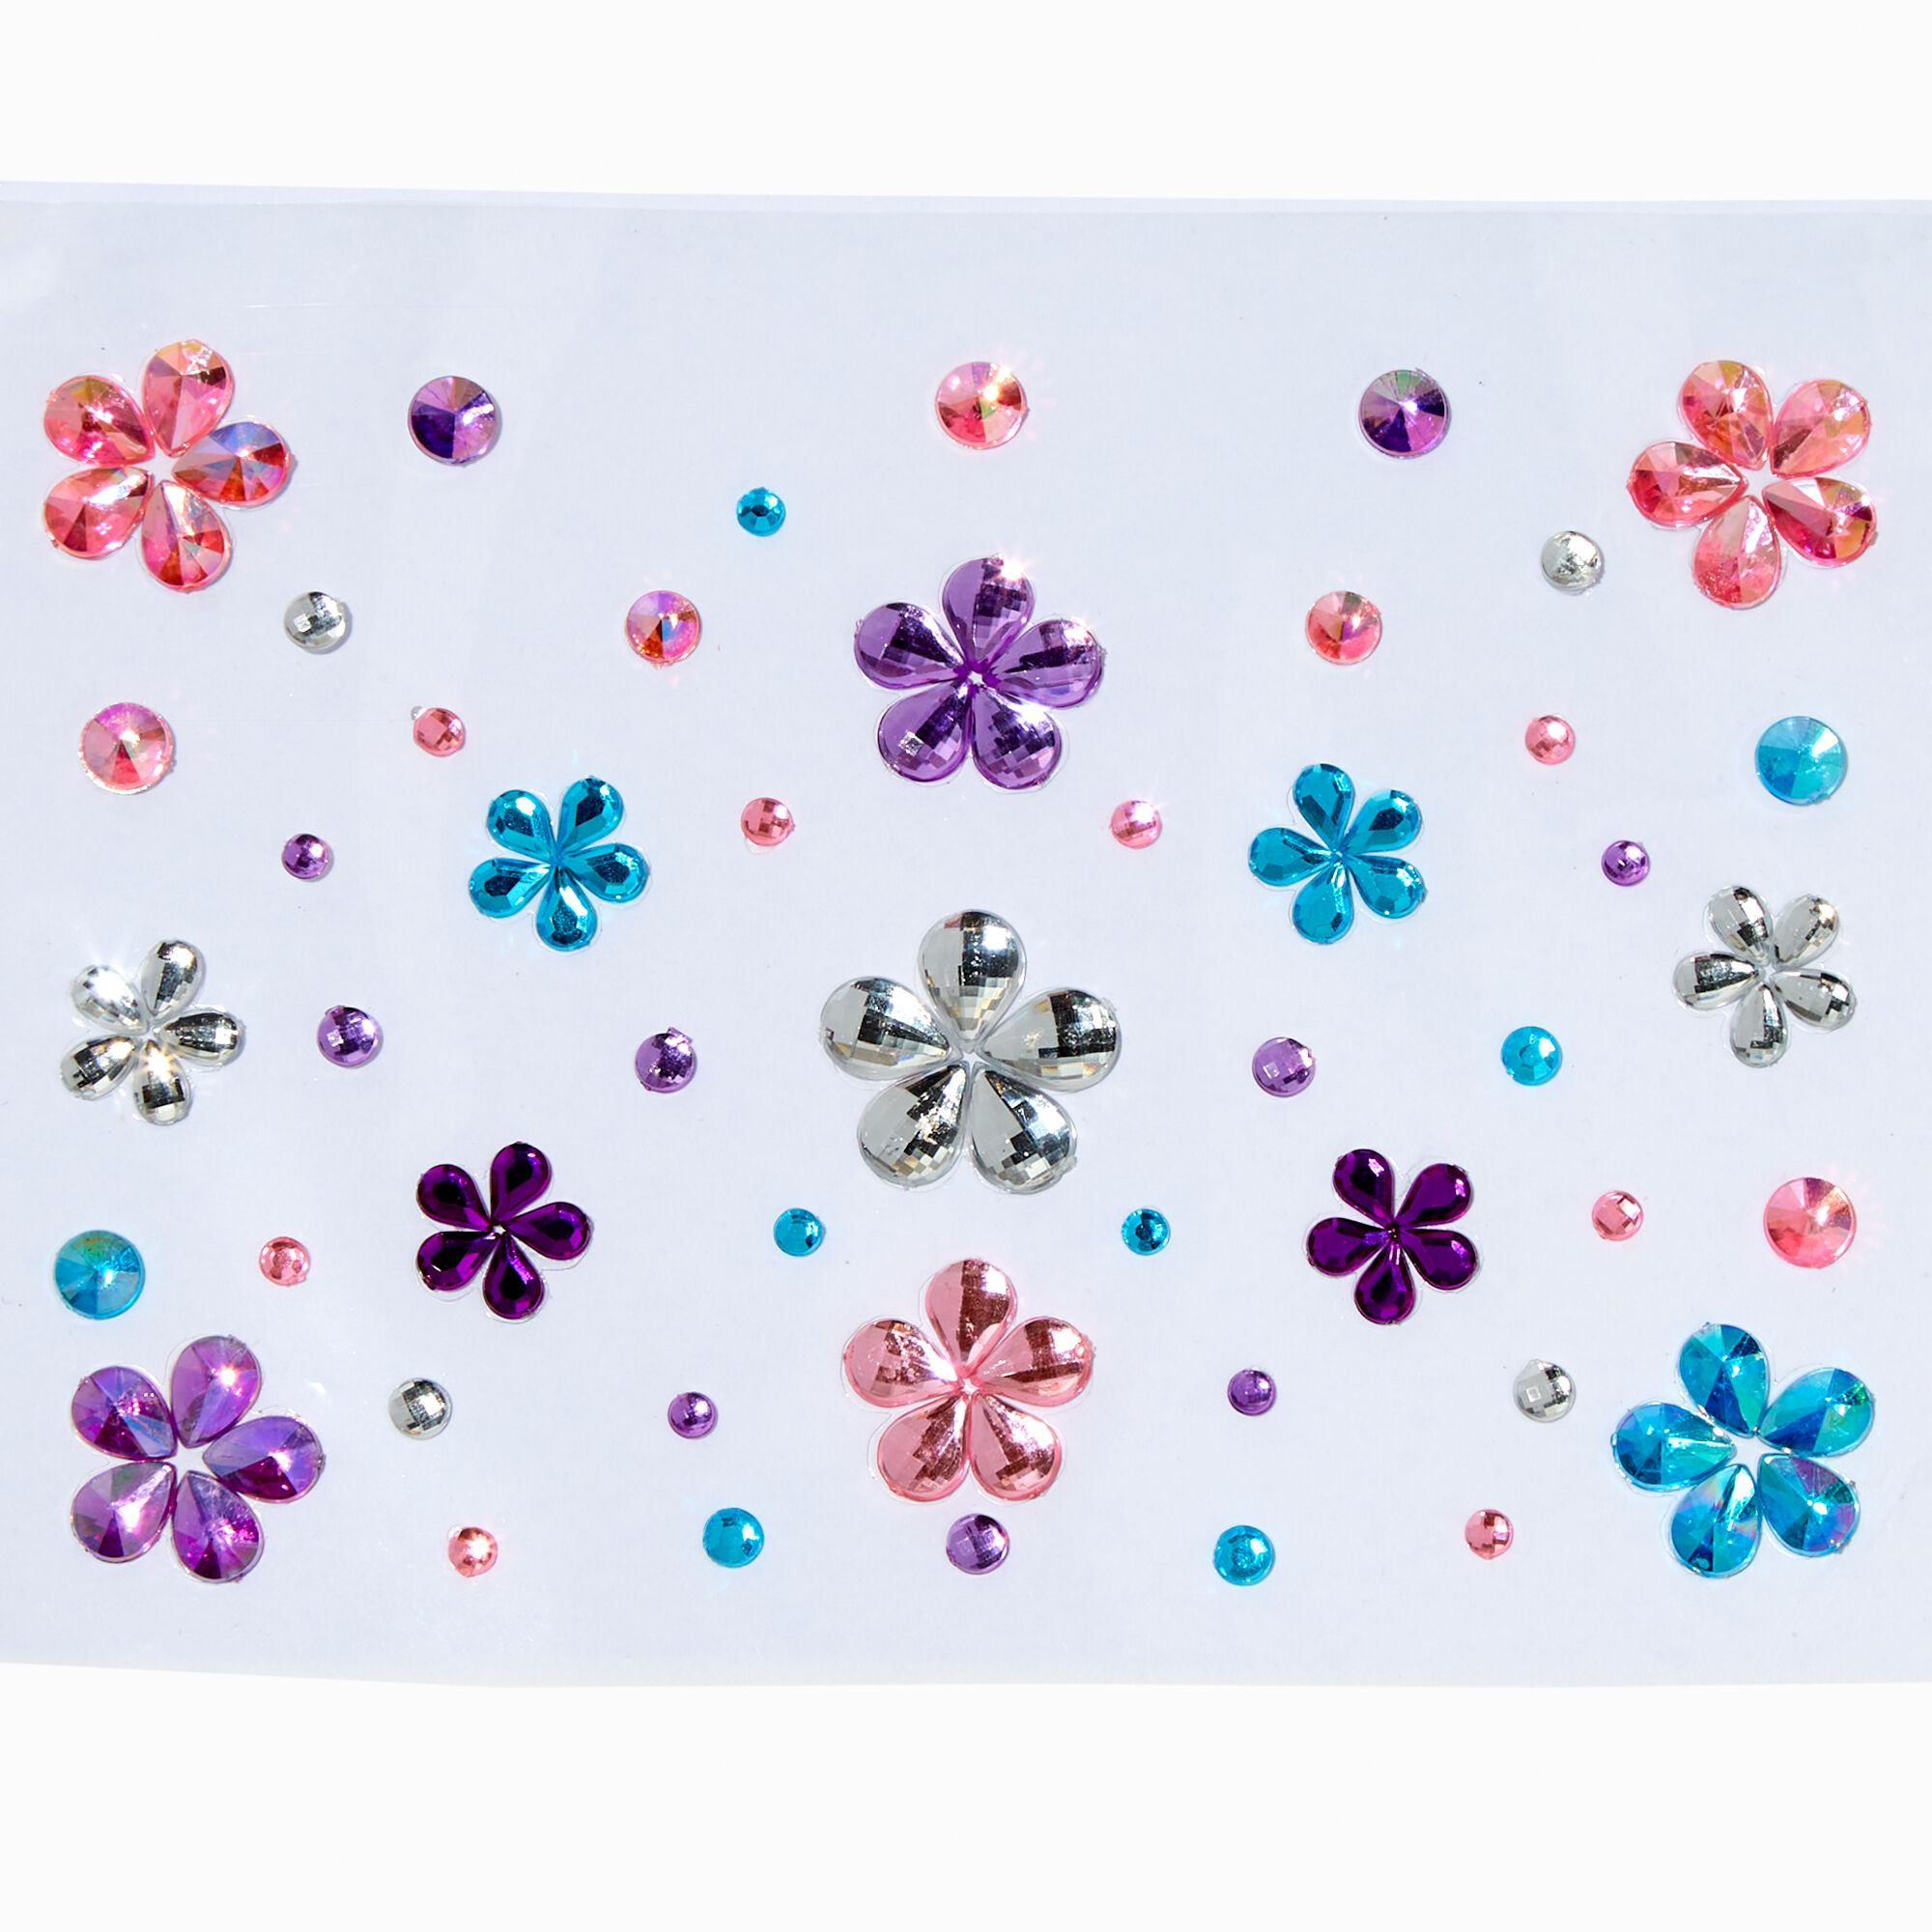 View Claires Mixed Daisies Body Stickers information